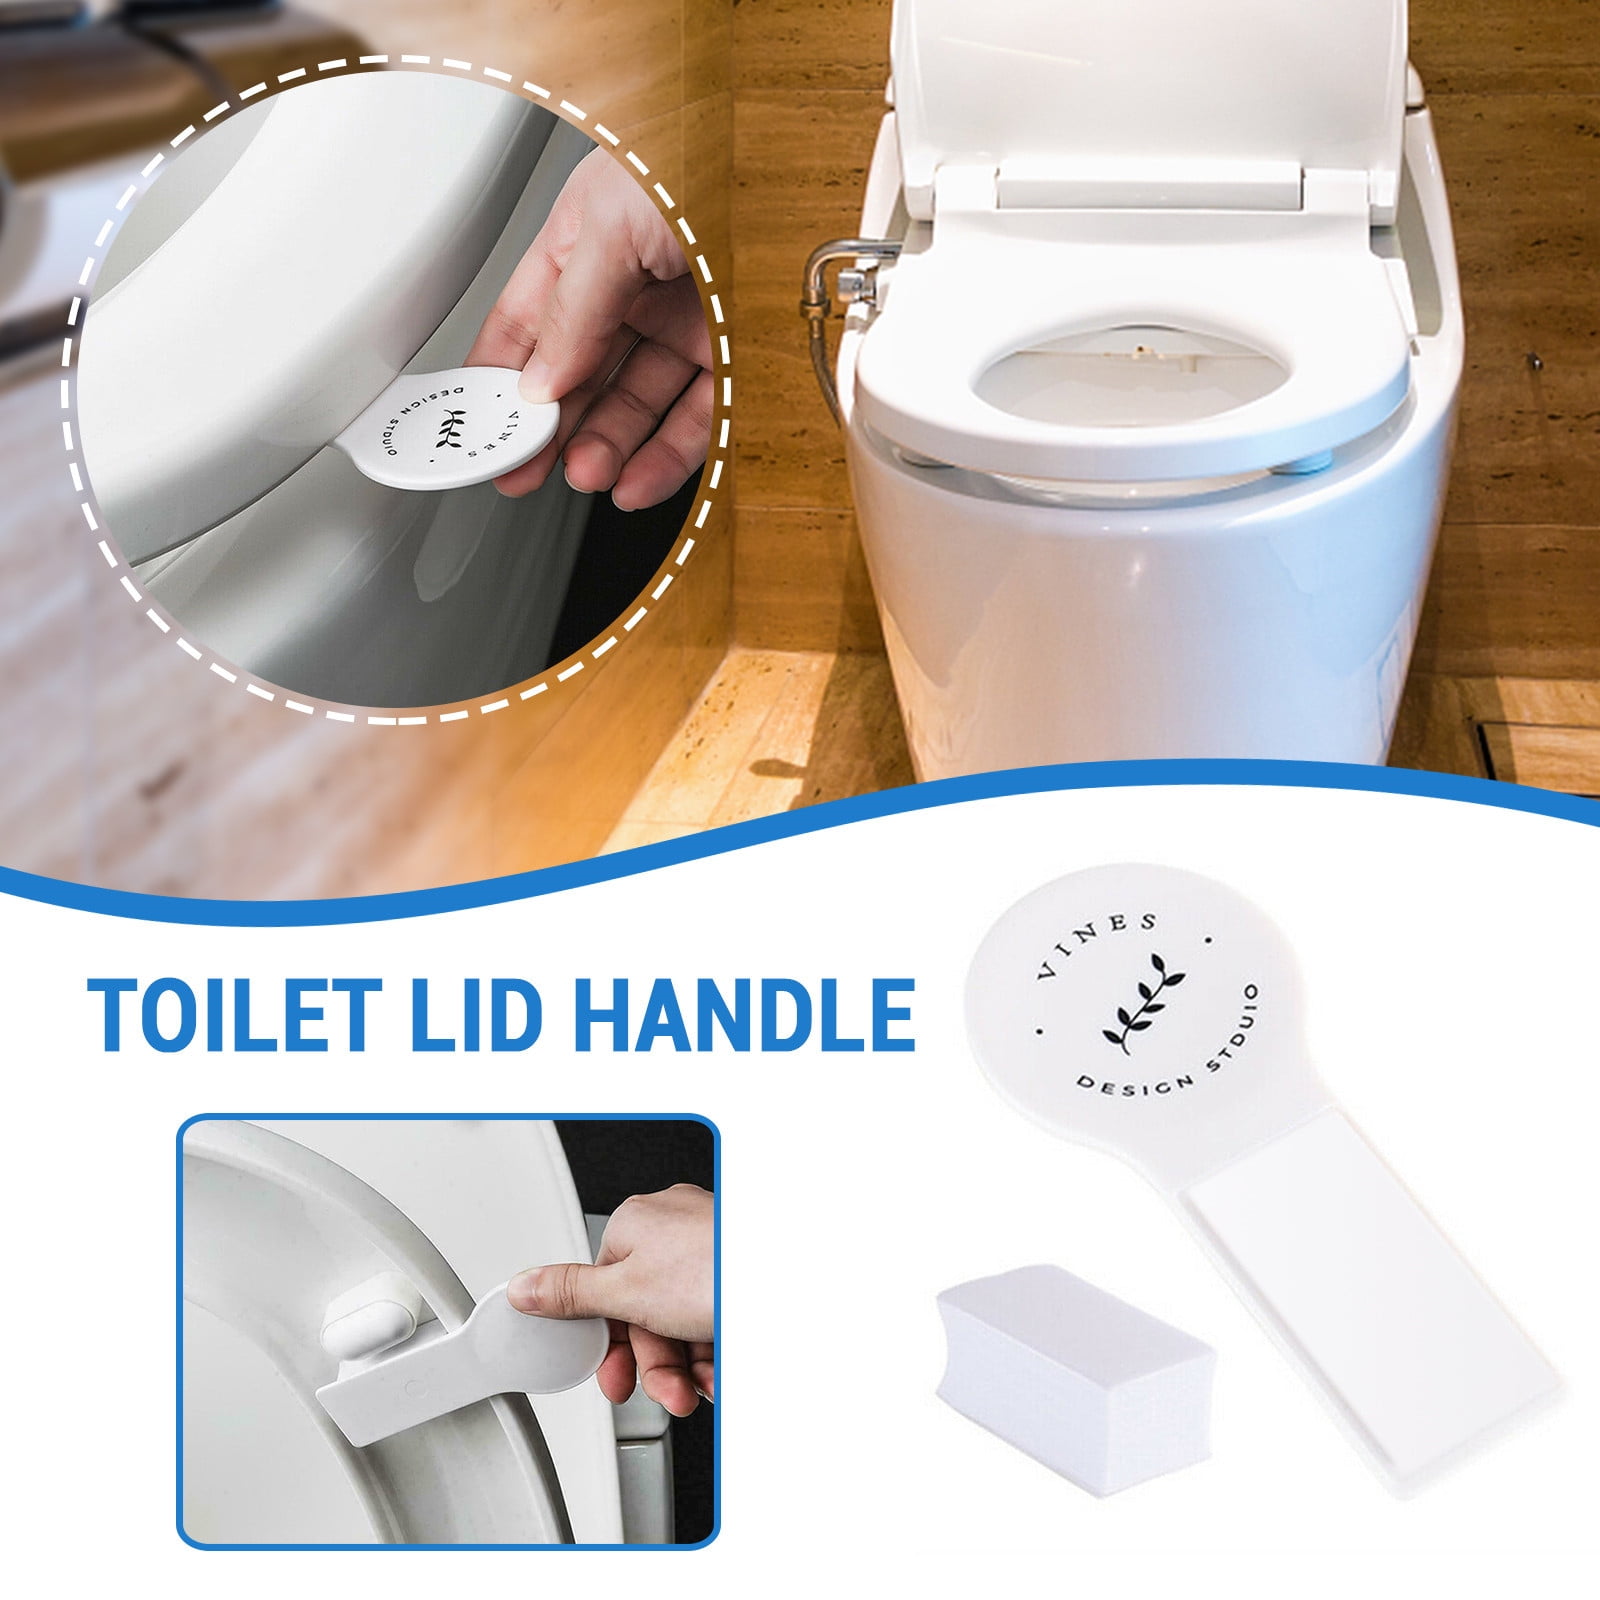 Avoid Touching Toilet Seat Handle Seat Cover Lifter Bathroom Accessories for Home More Sanitary Lifestyles Toilet Lifter Handle 2 Pcs Toilet Seat Cover Lifter Toilet Seat Holder Lift Tools 